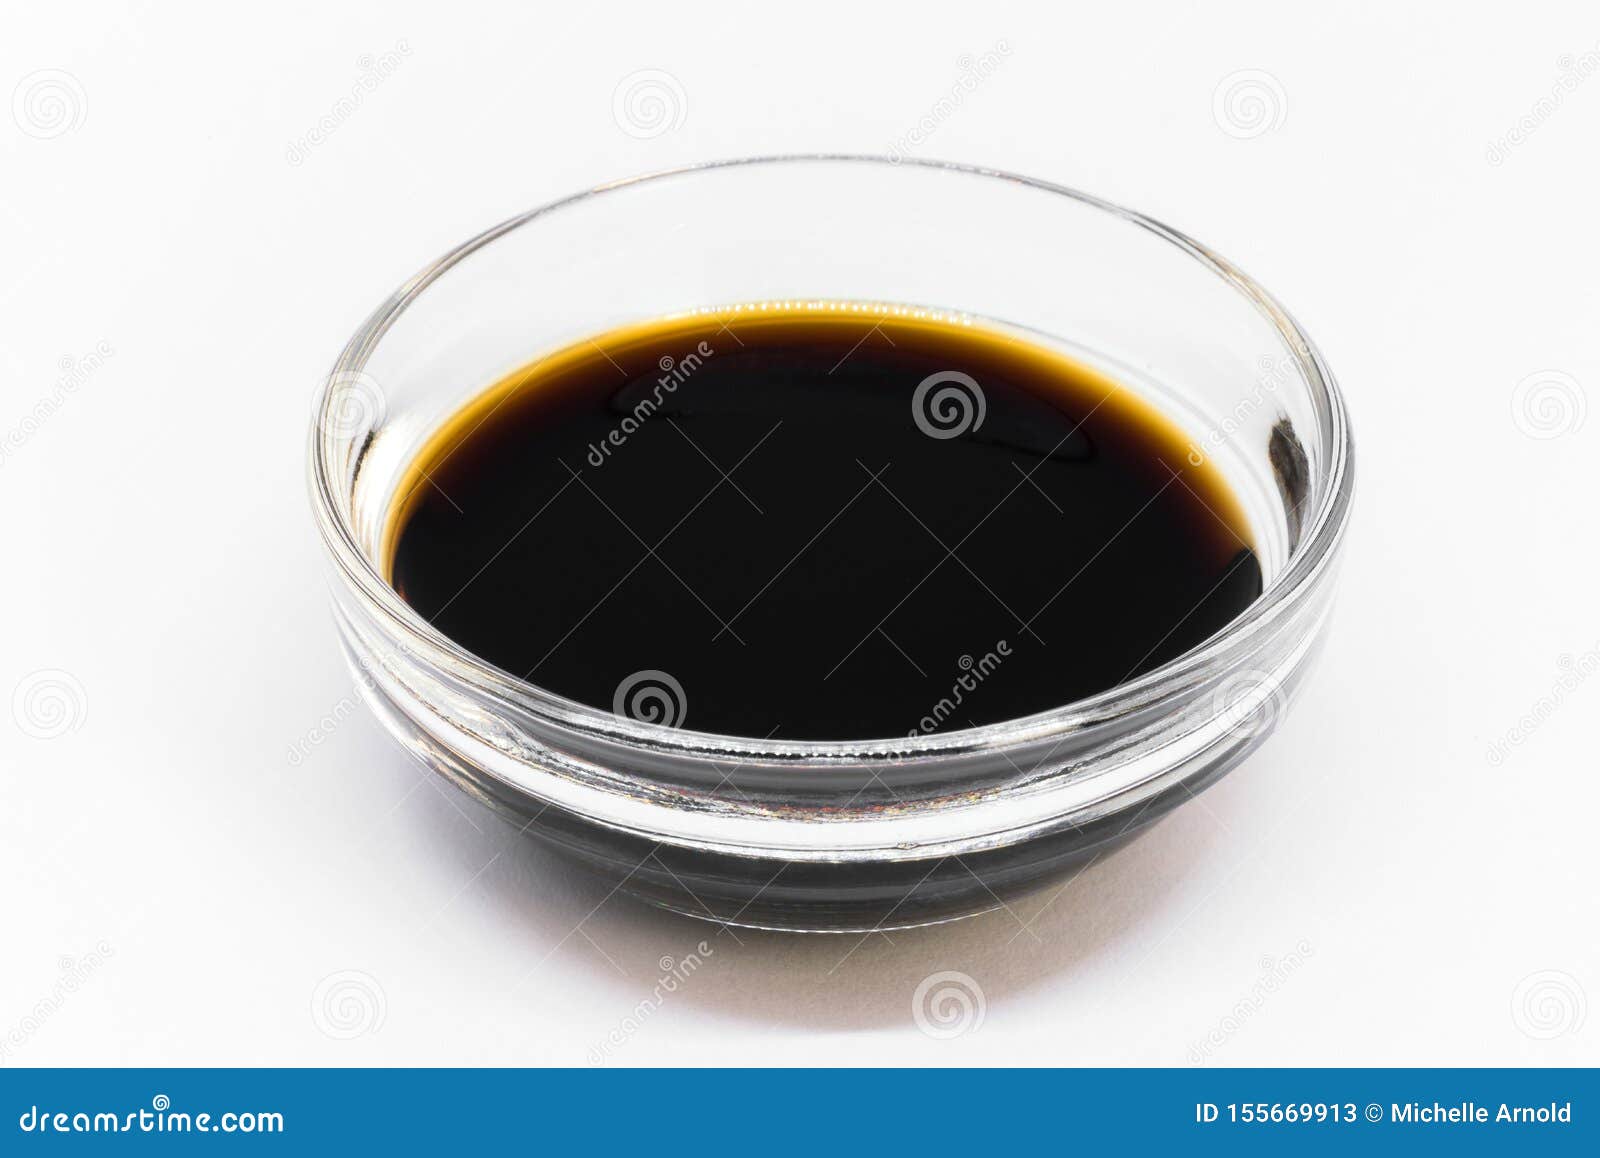 vanilla extract in an ingredient bowl